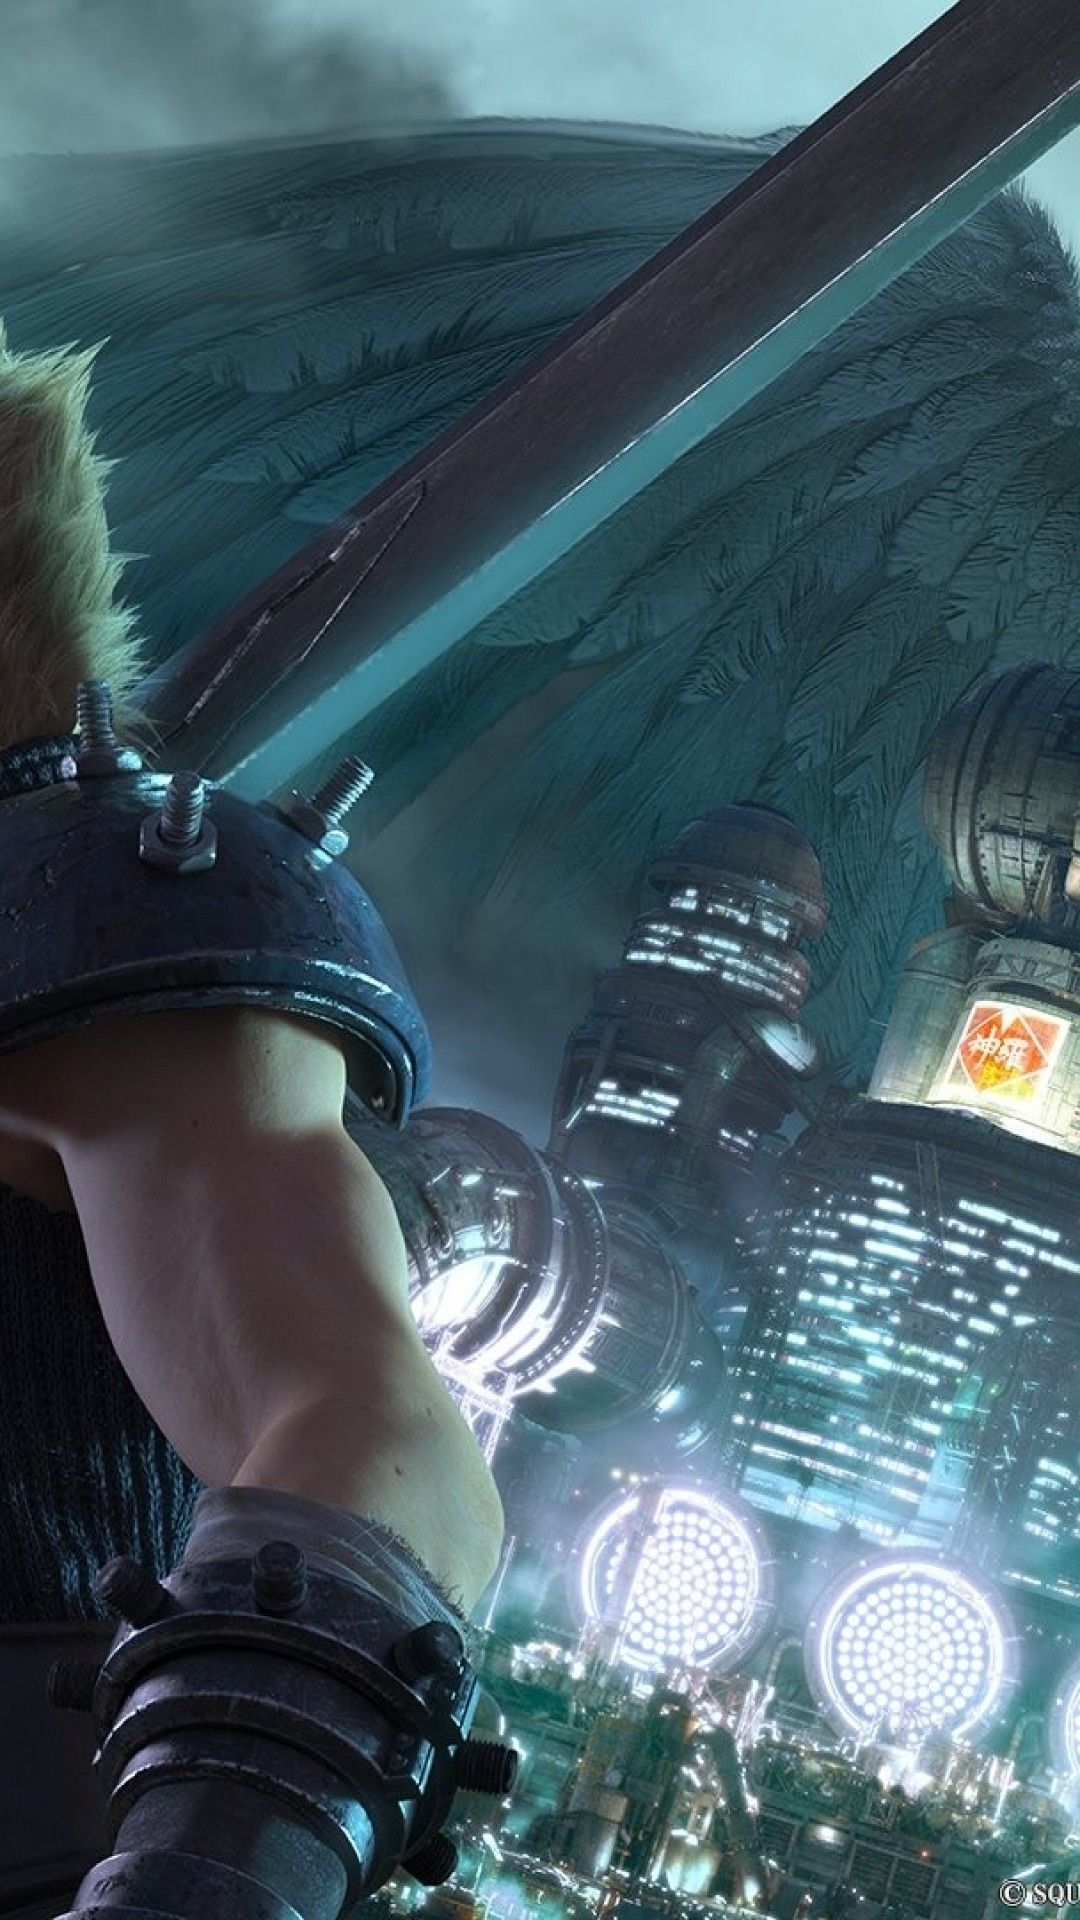 Final Fantasy 7 Remake Iphone Wallpapers